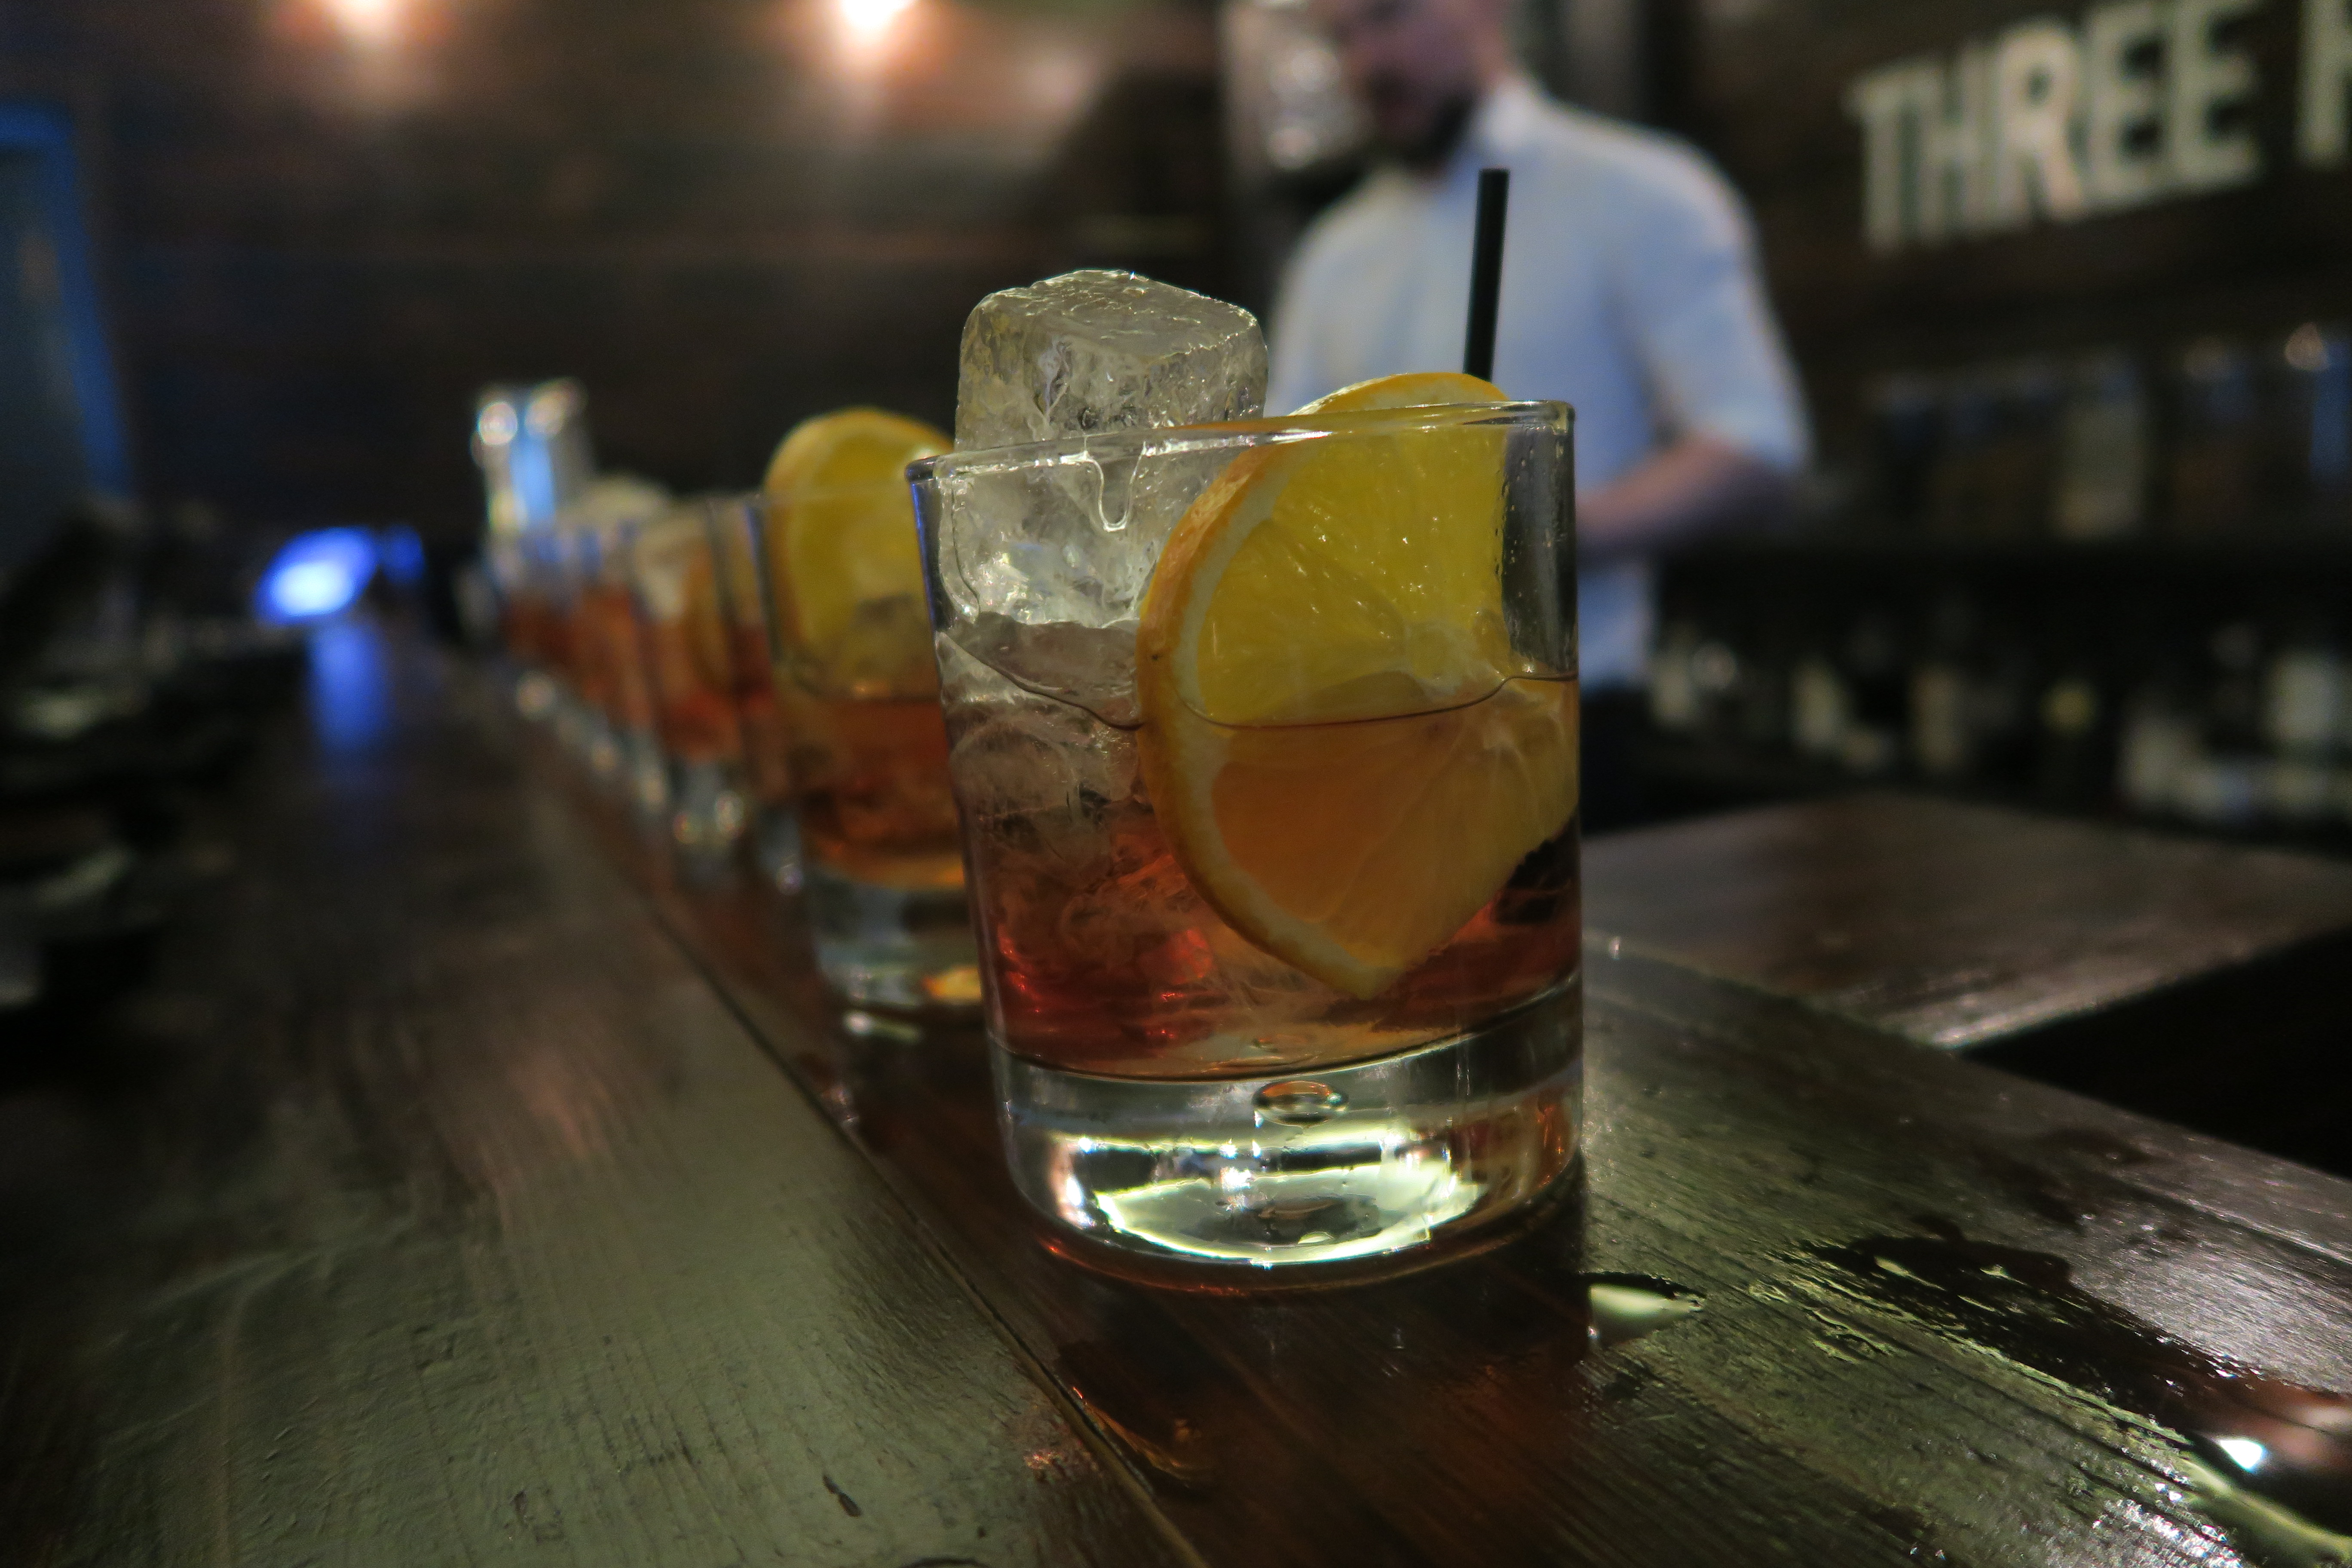 three-rivers-gin-manchester-gin-experience-16